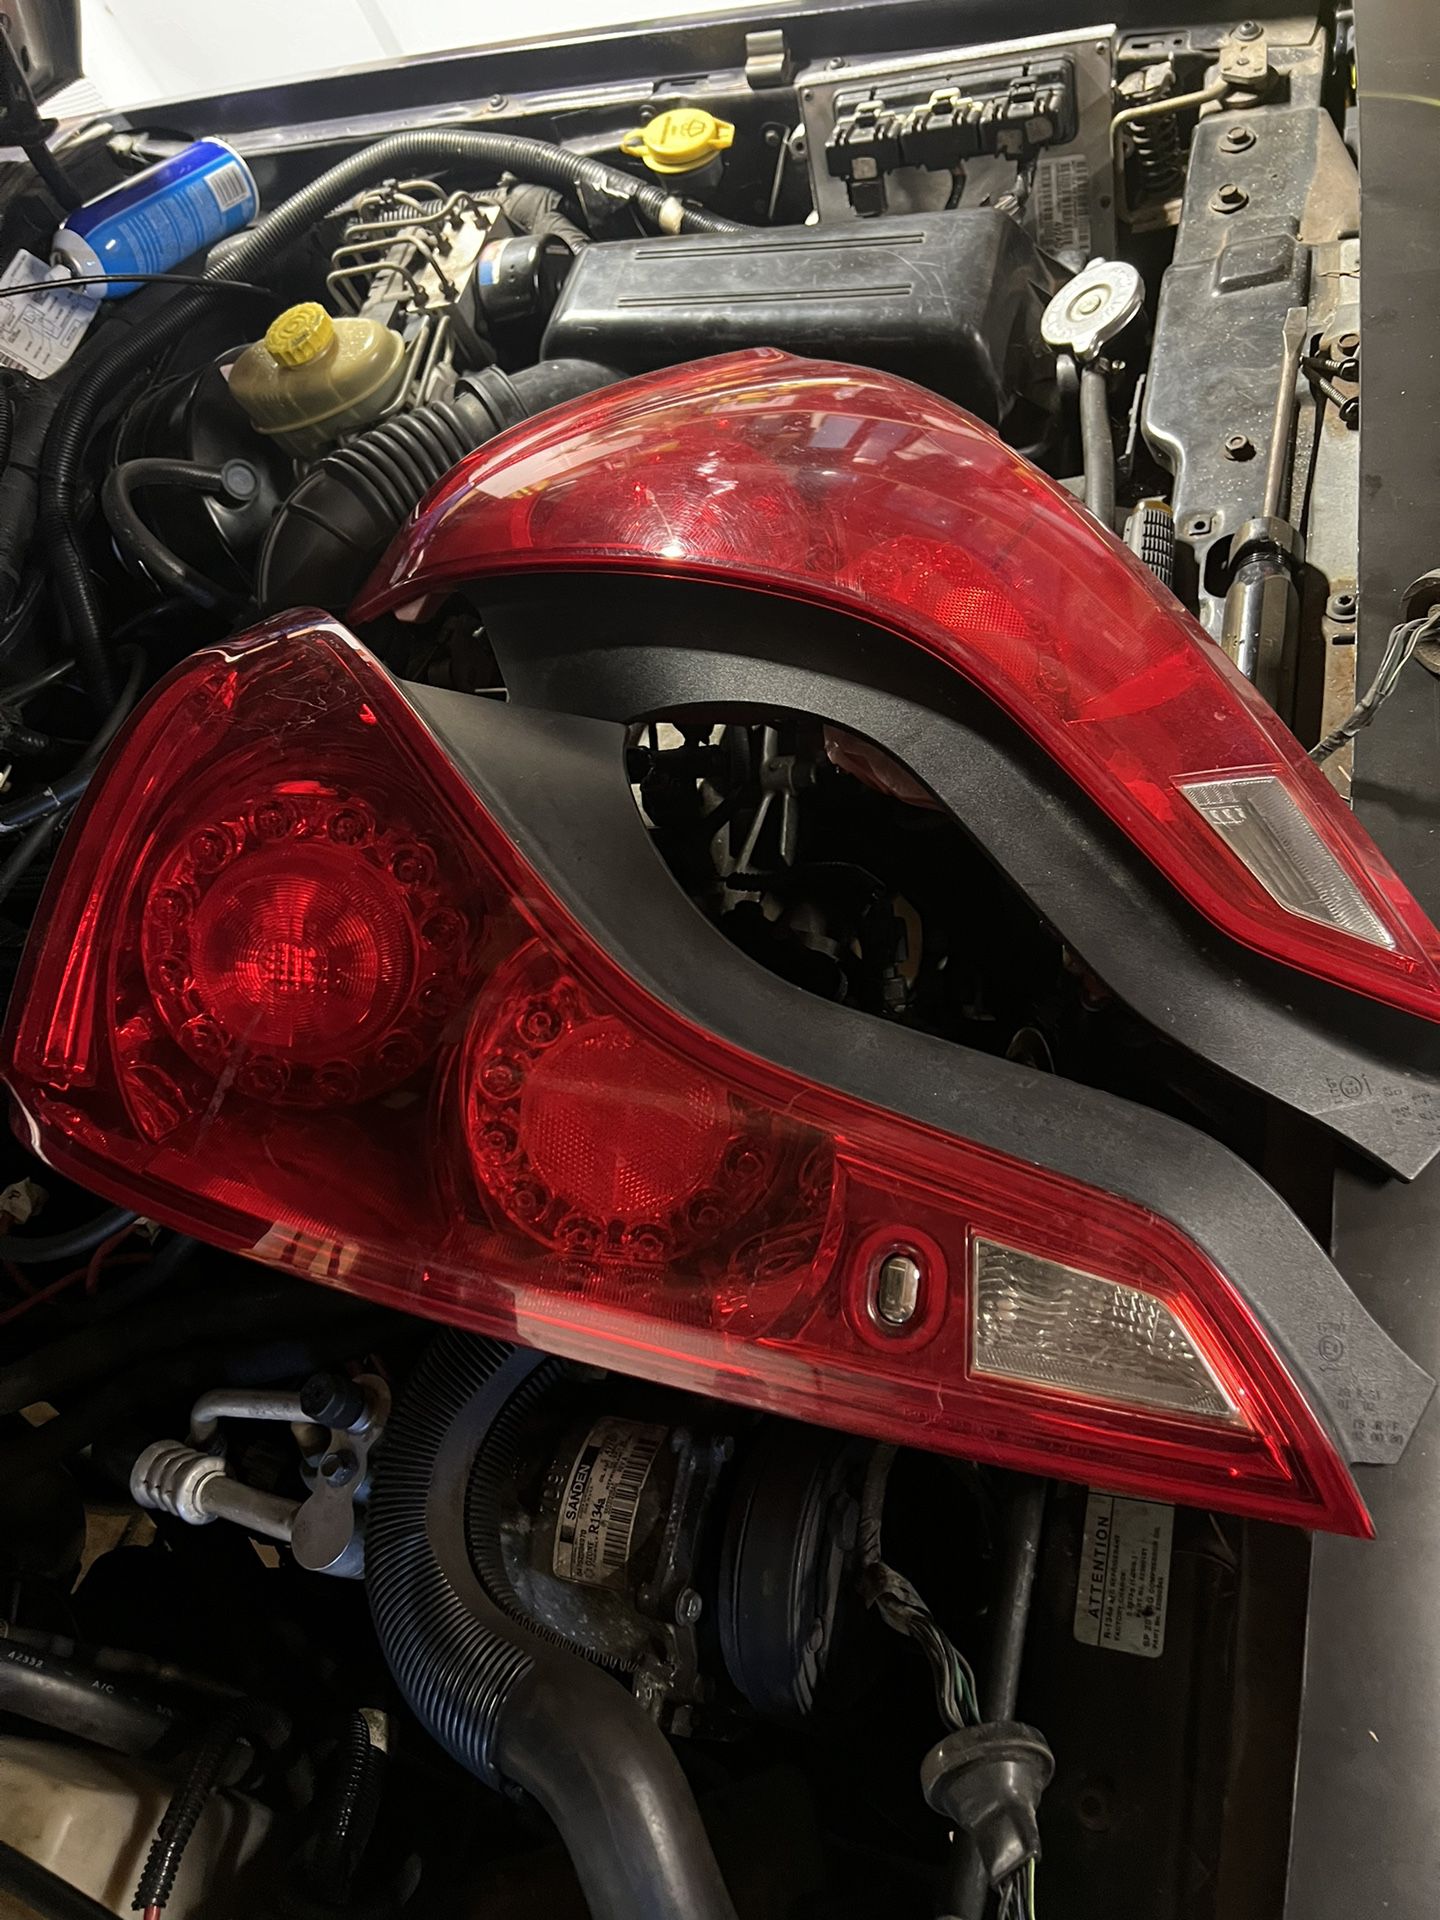 2008 G37 Infinity Rear Light Left And Right 